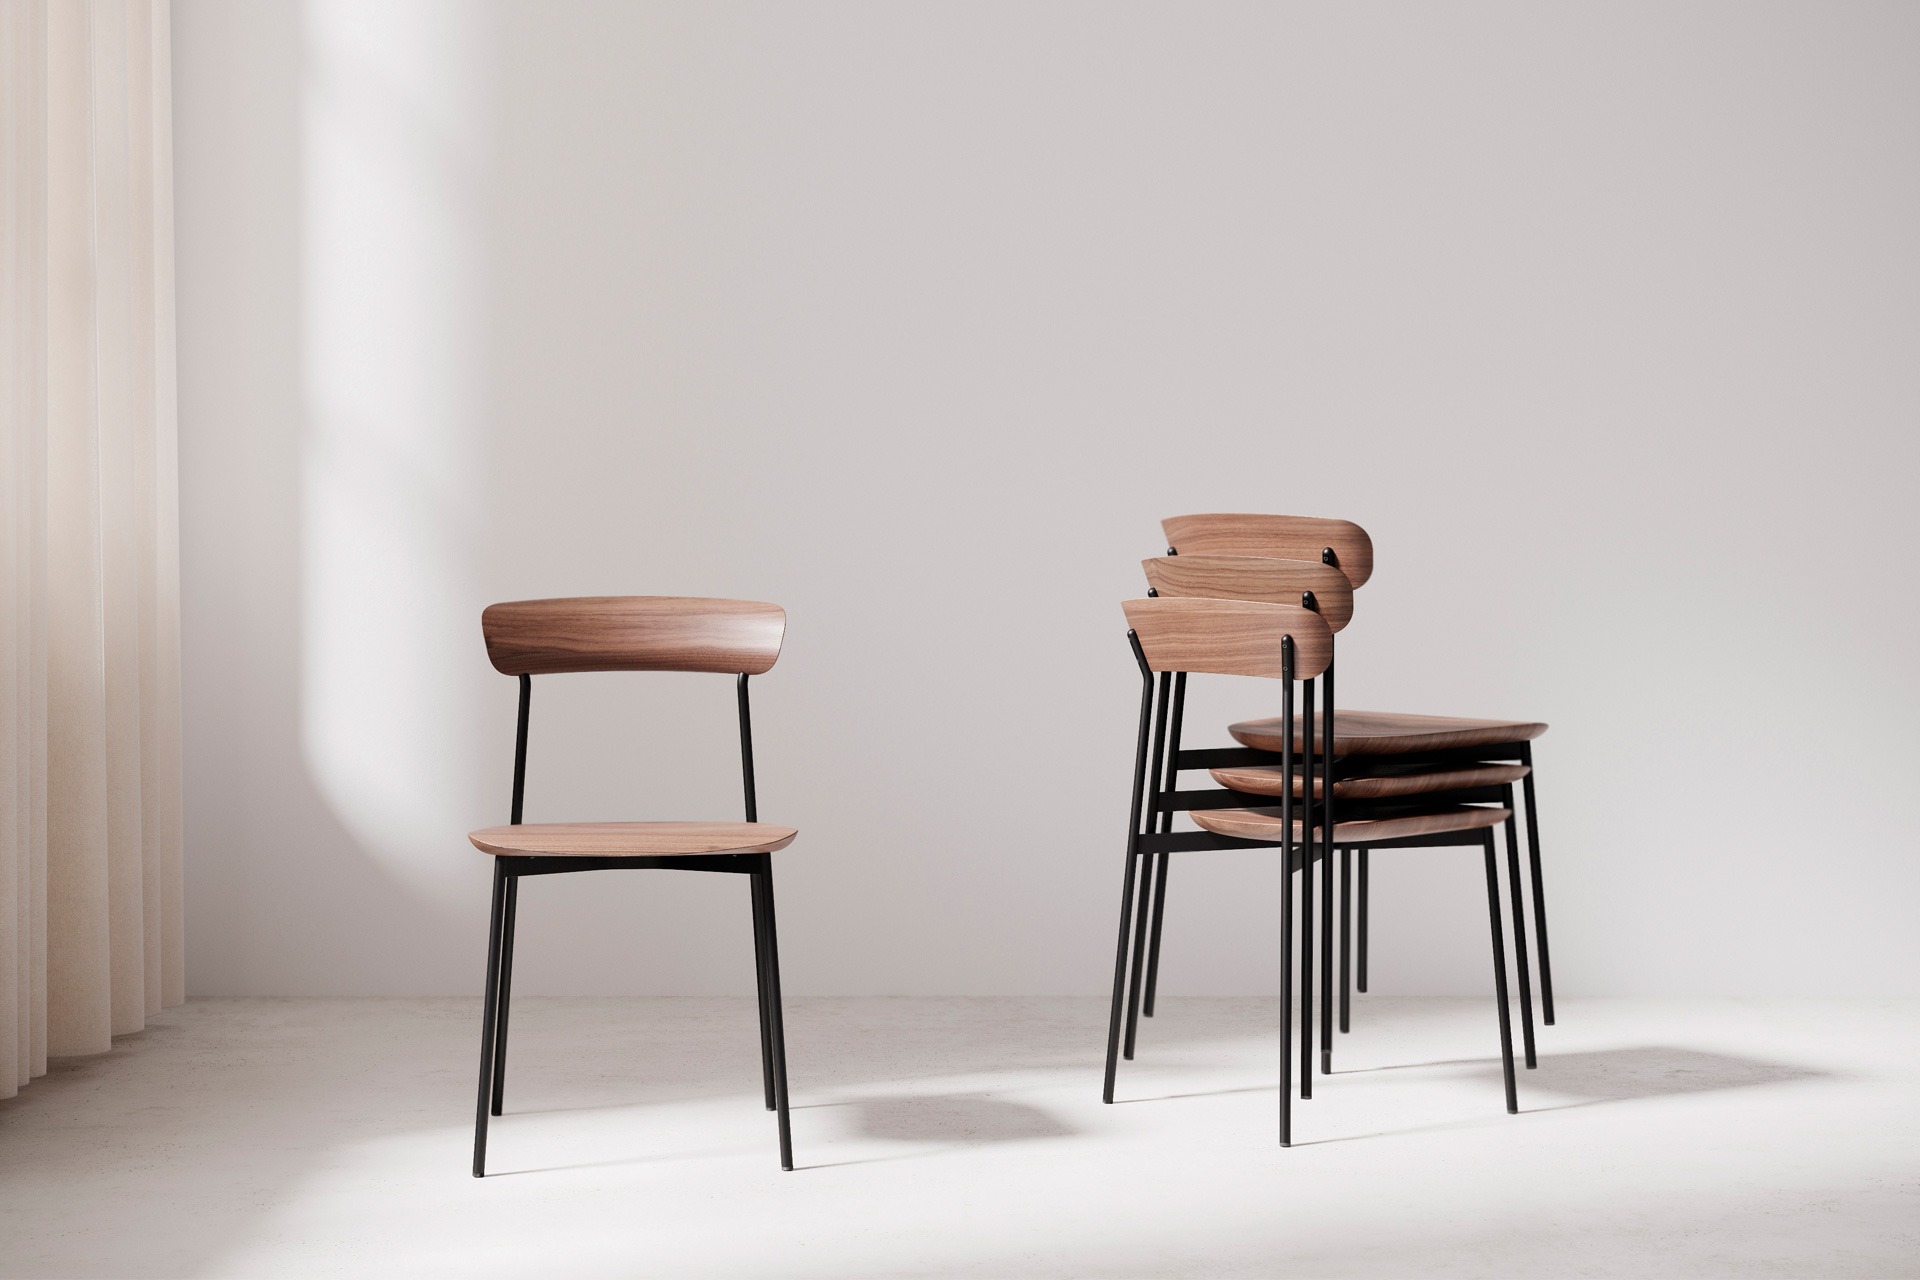 The Crawford Collection by Shanghai-based manufacturer Stellar Works